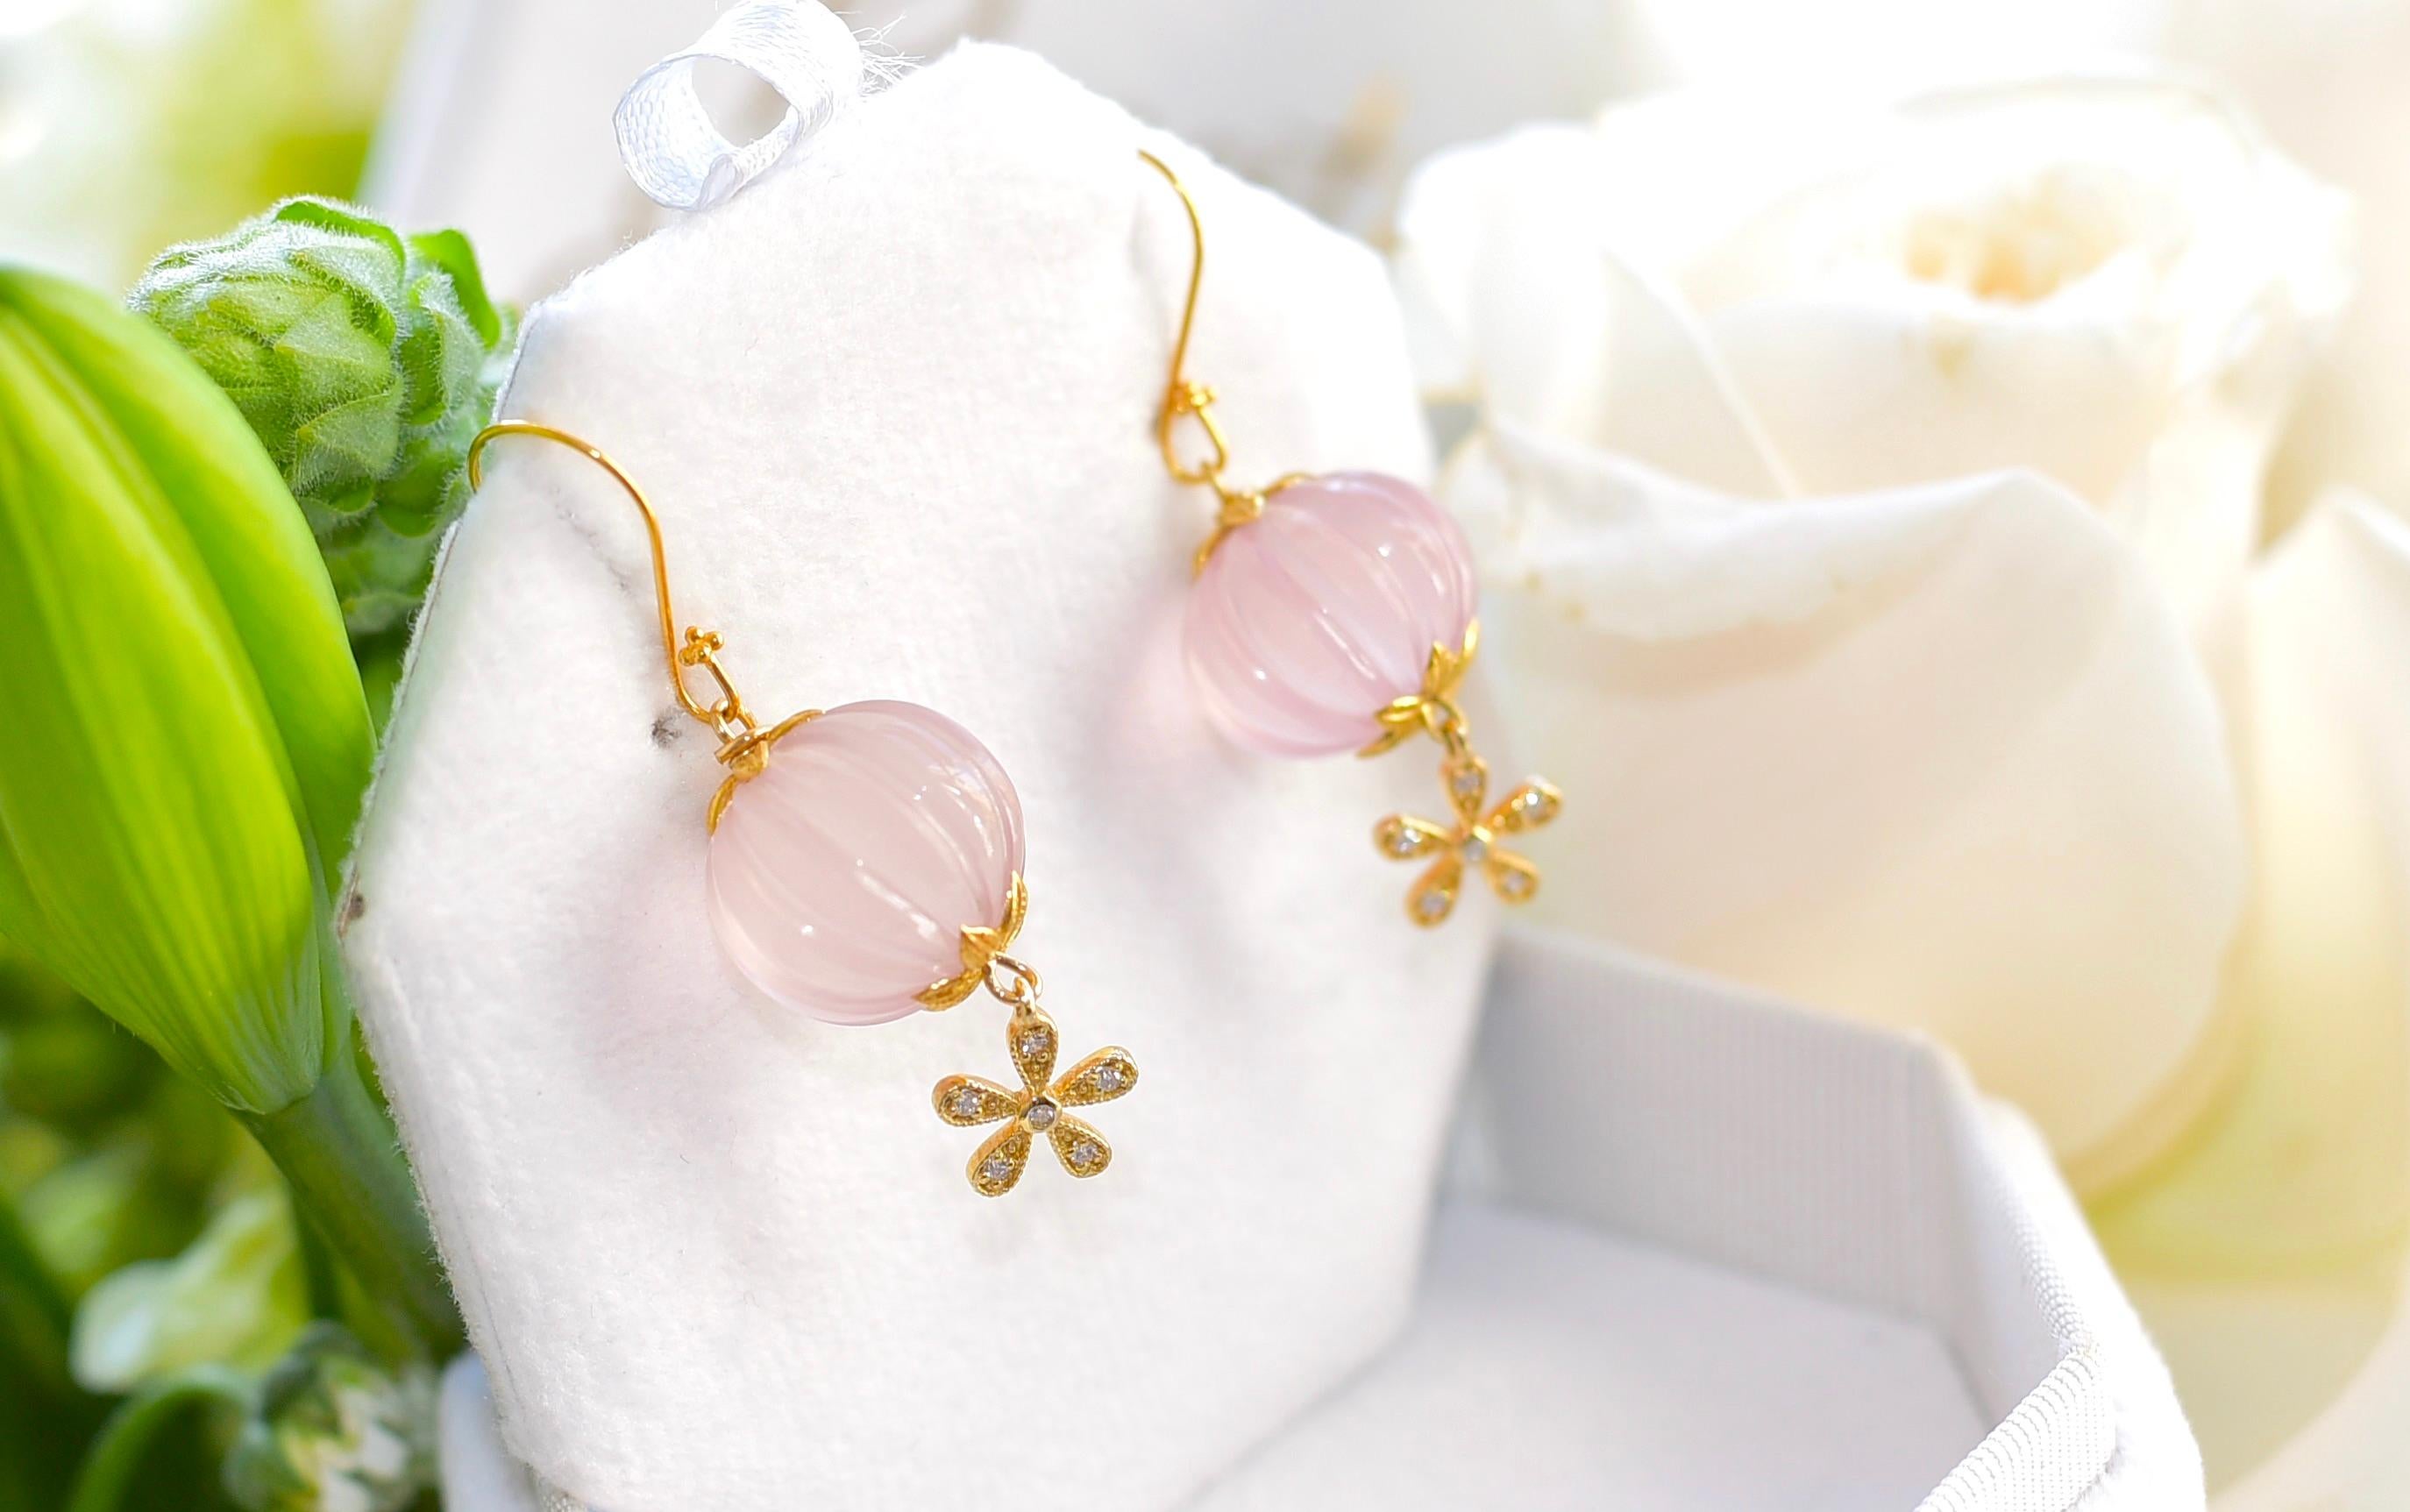 If you like Rose Quartz and a feminine look then this simple and beautiful piece of jewelry is for you!
Rose Quartz Carved Melon Bead (15,5mm) with sparkling and cute 14K solid Yellow Gold Diamond 5 petal flower Charm. Absolutely lovely look and